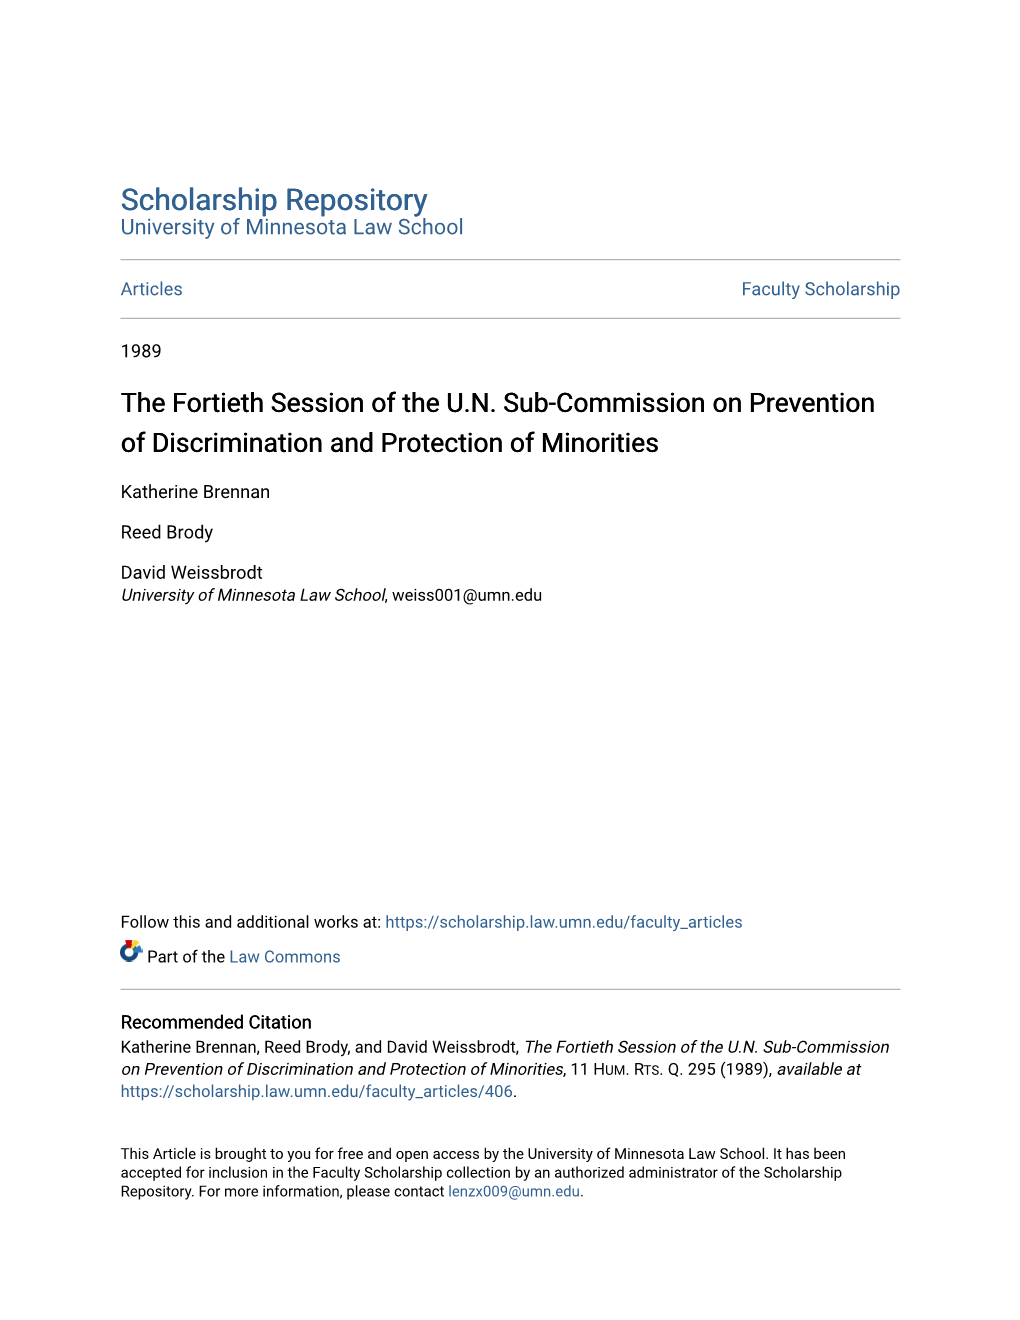 The Fortieth Session of the U.N. Sub-Commission on Prevention of Discrimination and Protection of Minorities